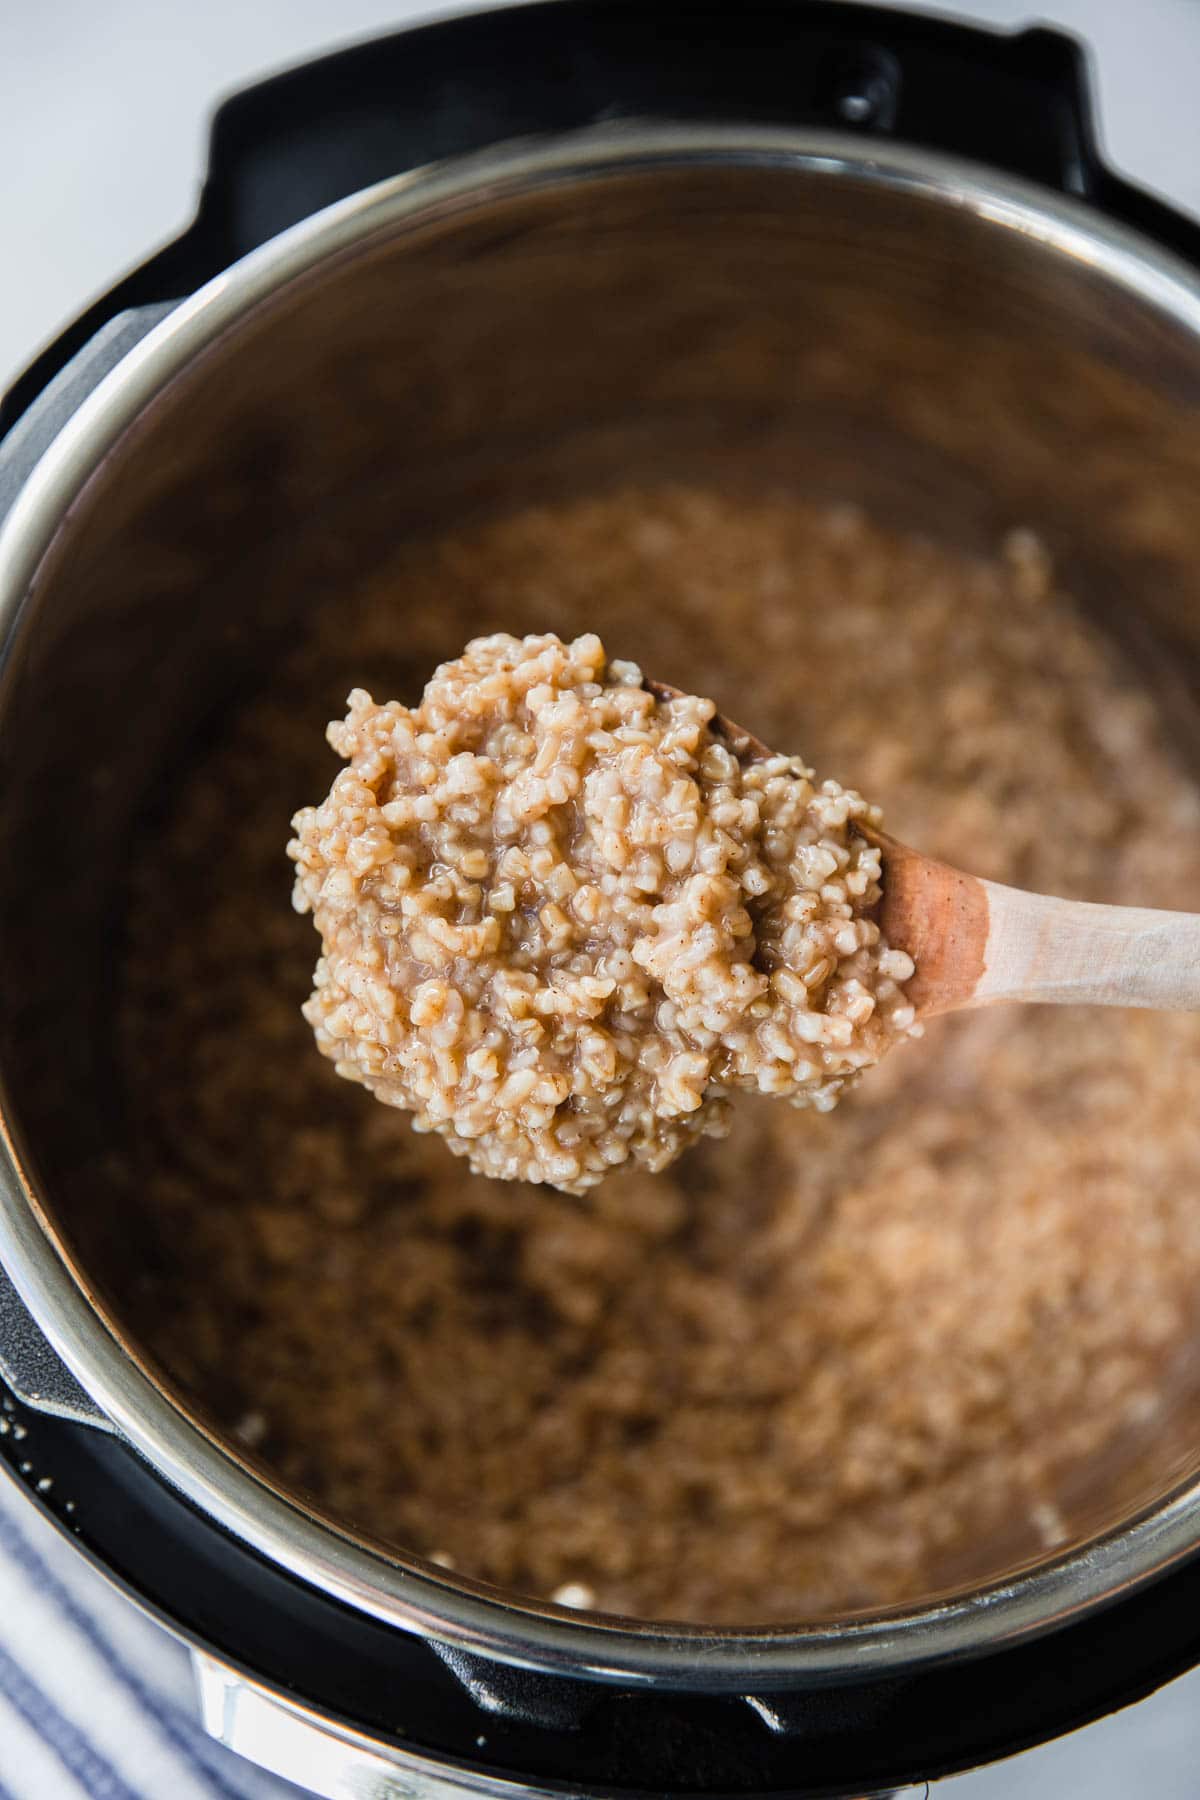 A wooden spoon with a scoop of cooked steel cut oatmeal.